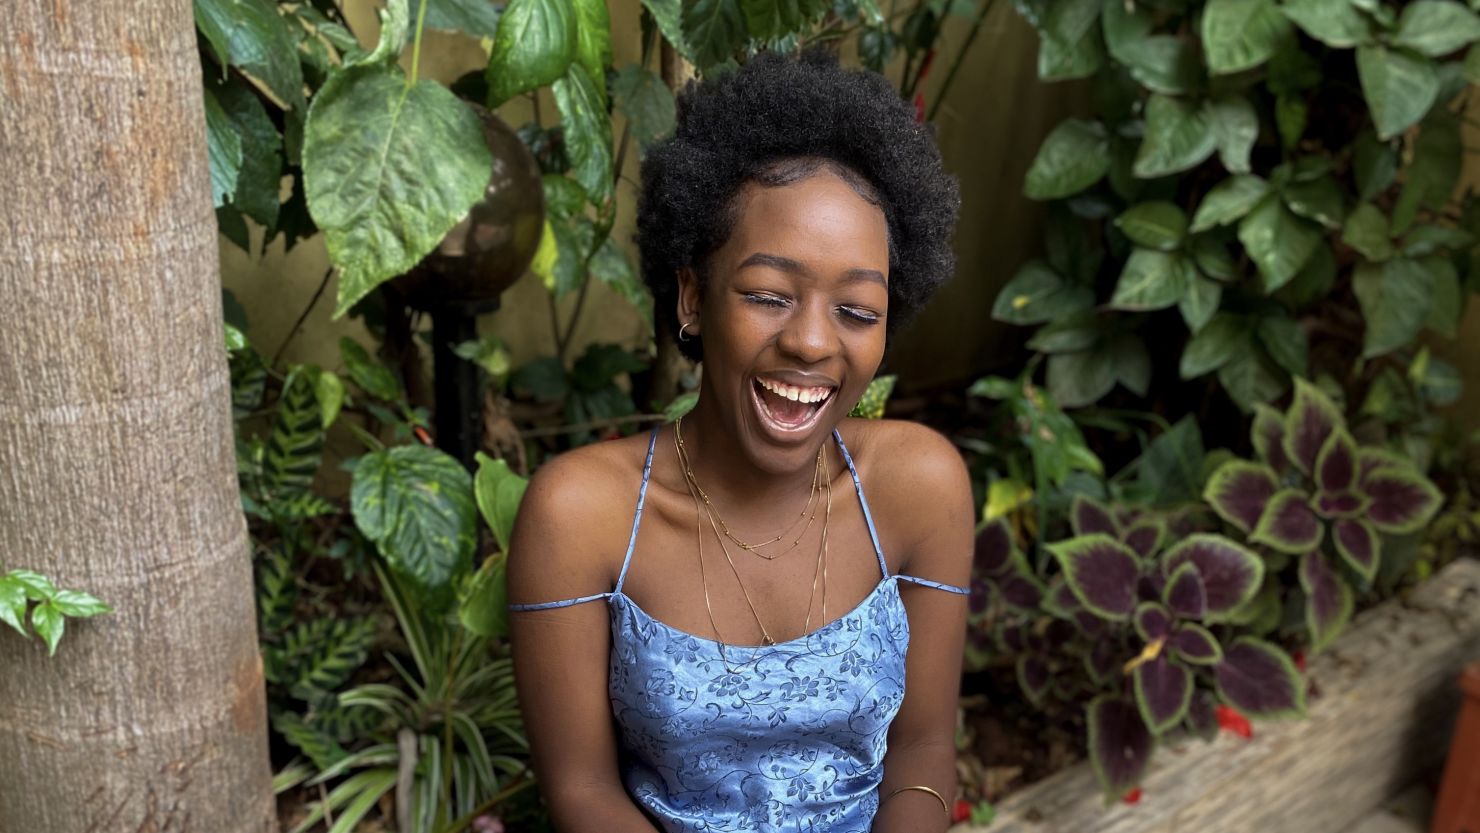 19-year-old Elsa Majimbo is making Africans on social media laugh through her quirky monologues